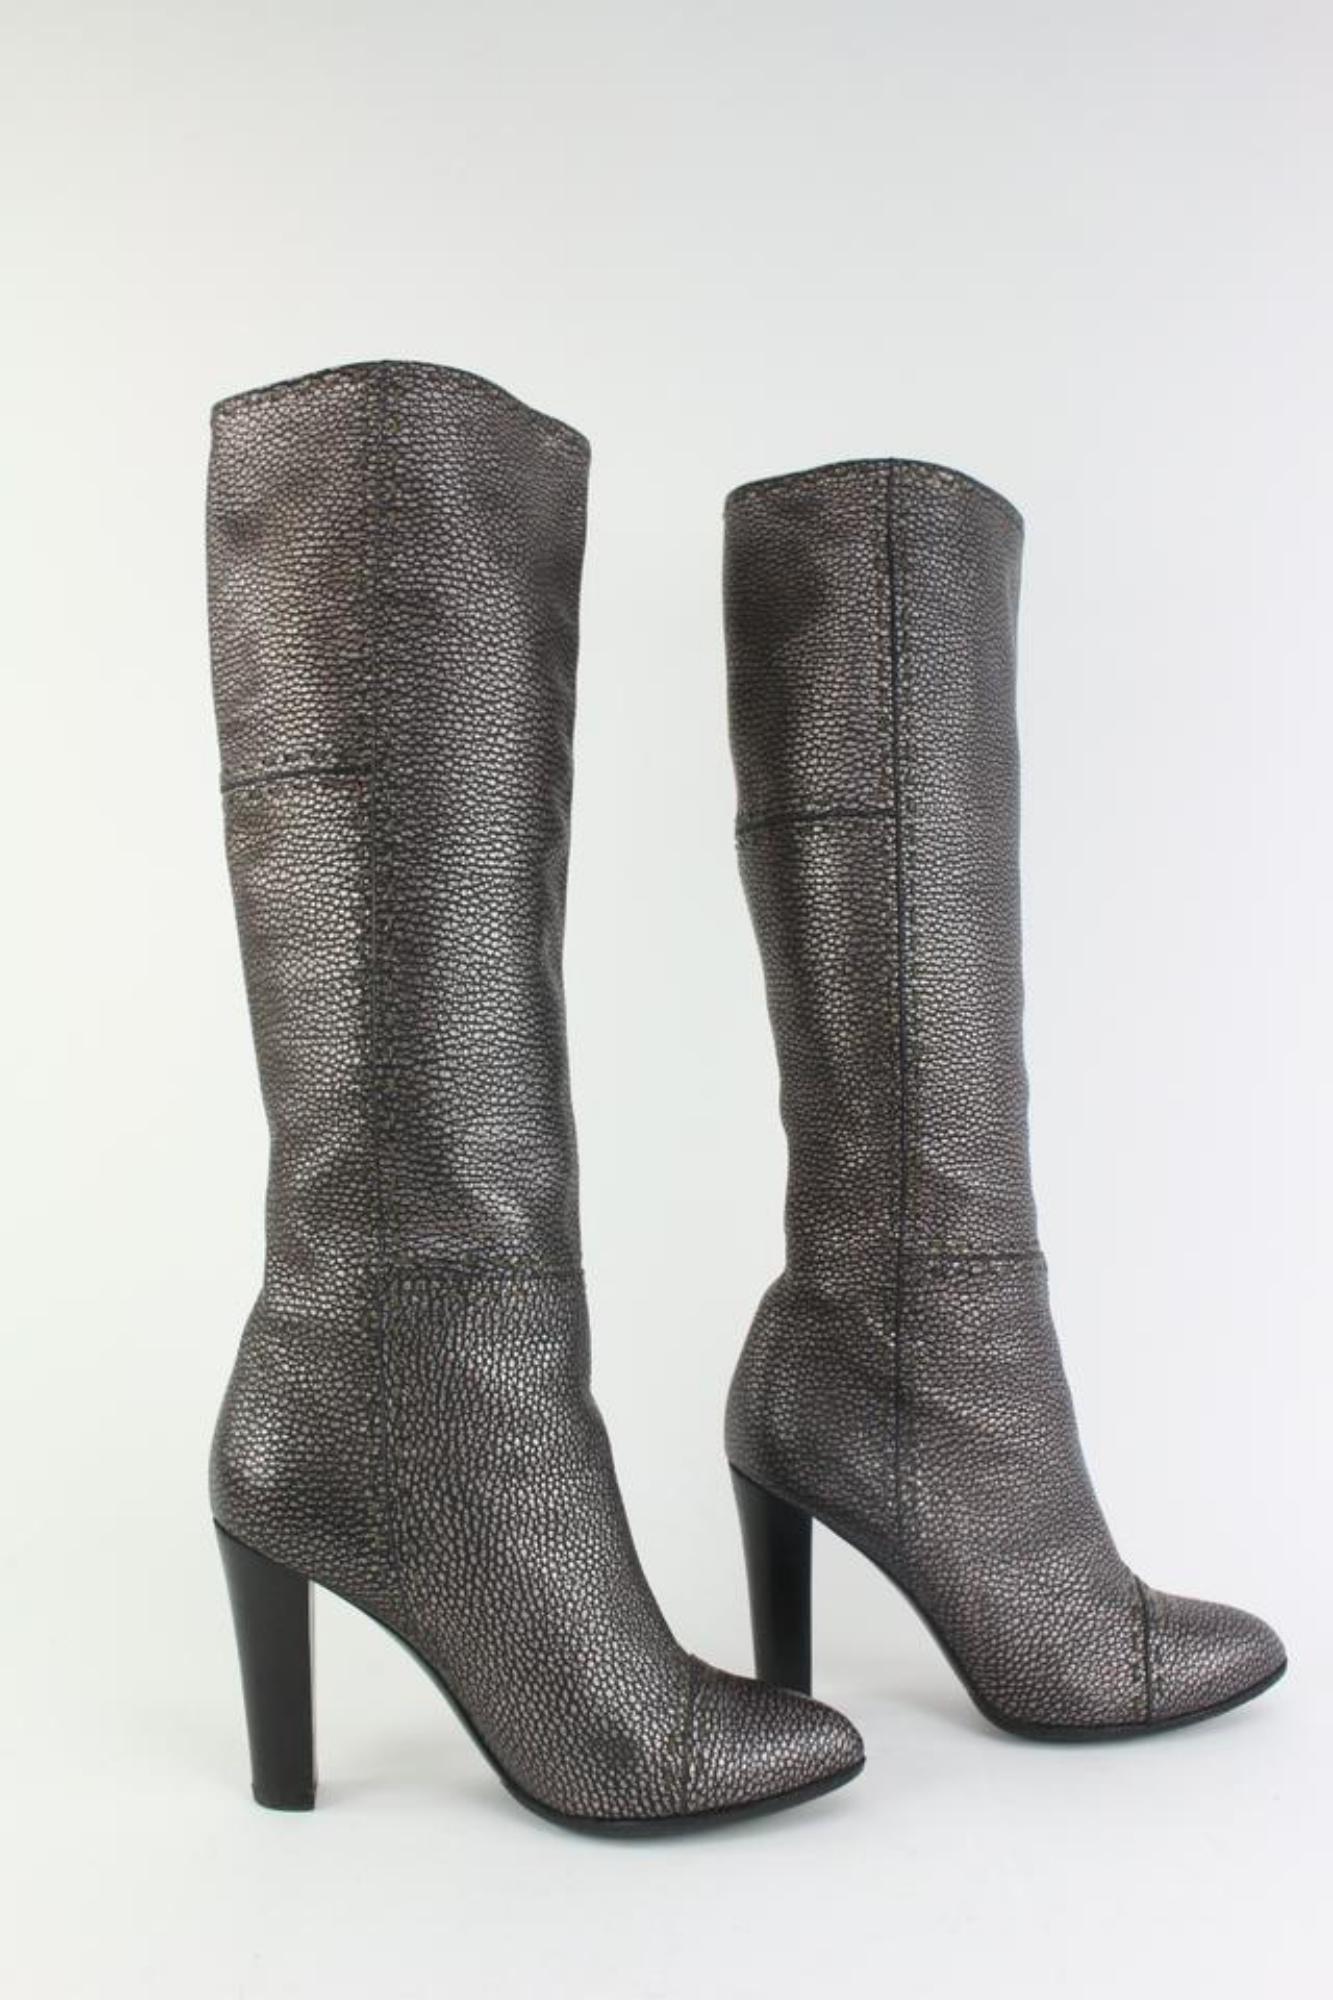 Fendi Women's 36.5 Knee High Grey Leather Selleria Boots 1F1206 For Sale 6